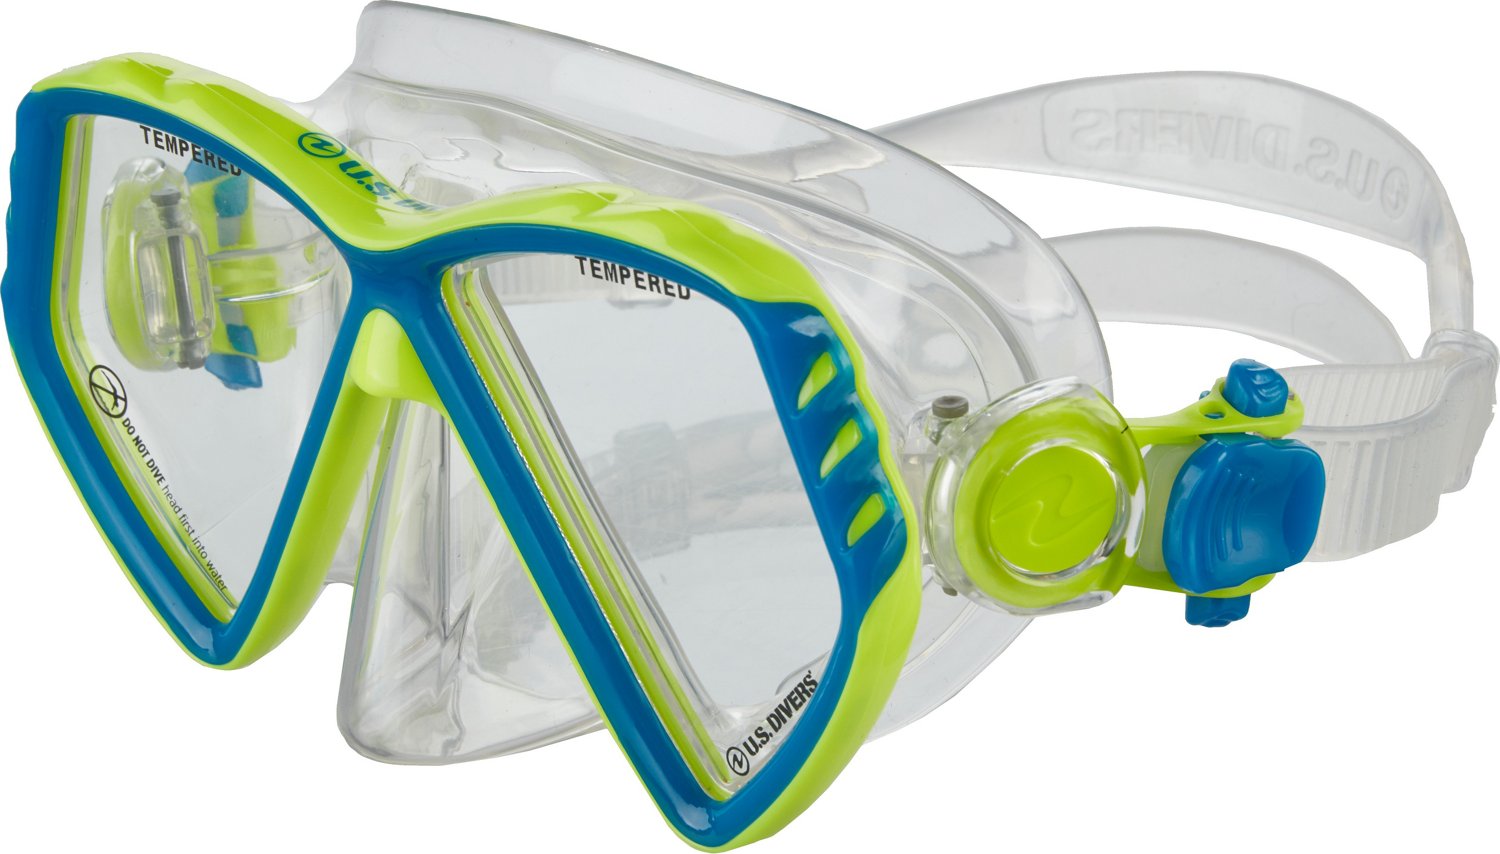 kids swim goggles with nose cover